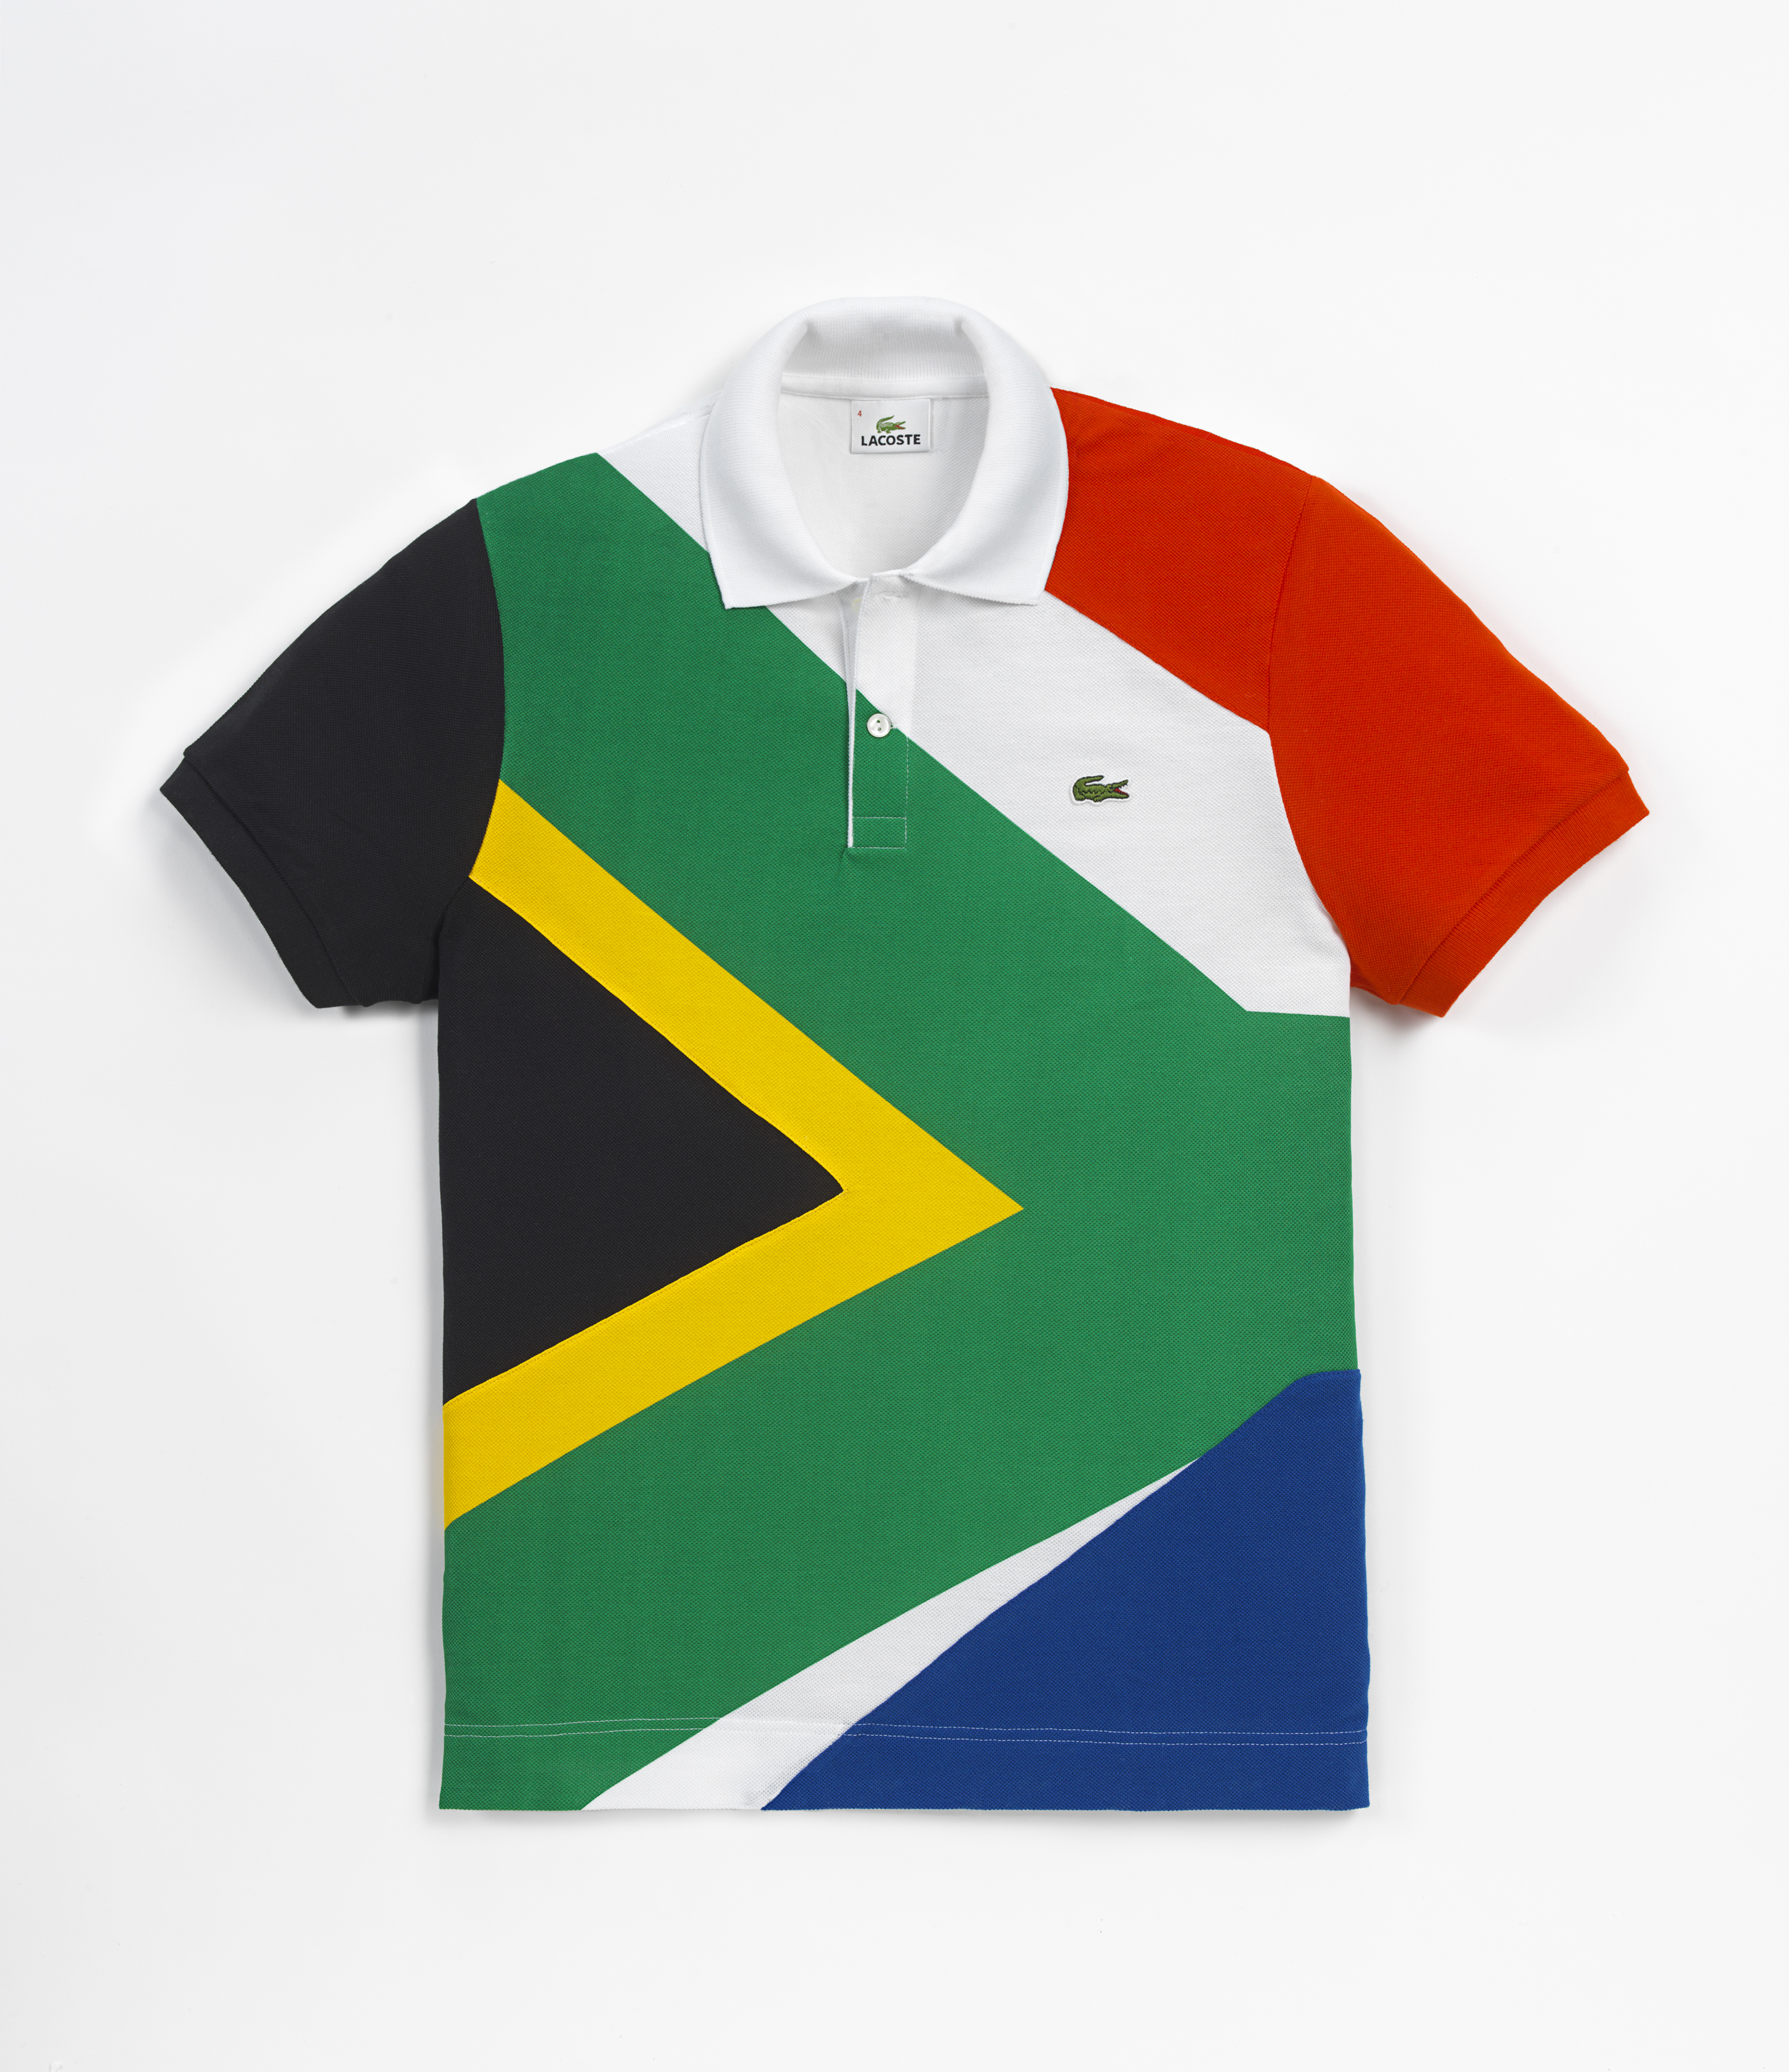 16 Nations - Lacoste goes flagtastic 